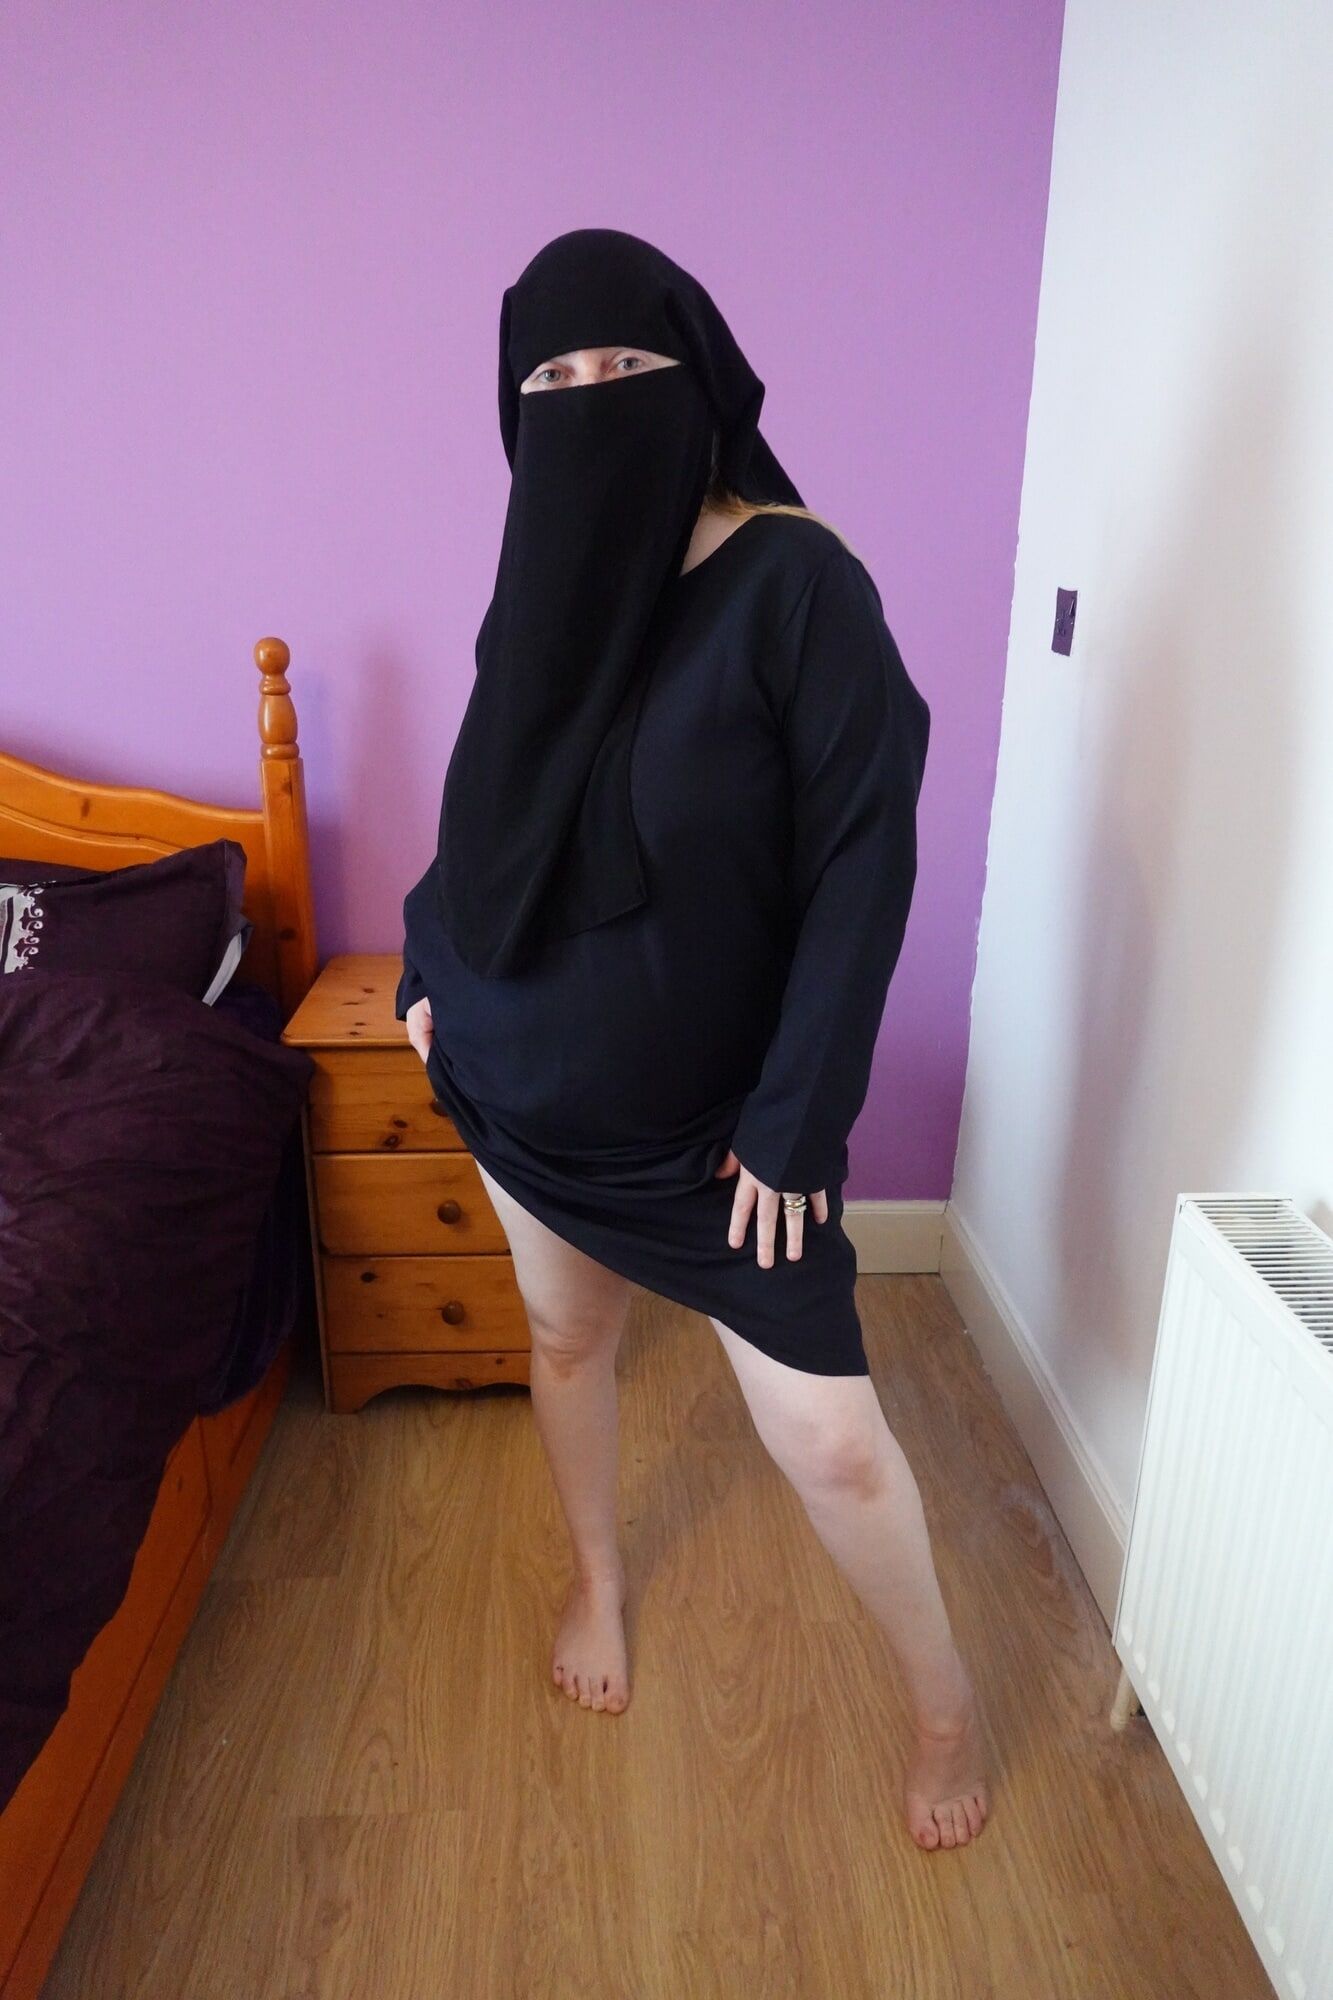 wife wearing Burqa with Niqab naked underneath #7